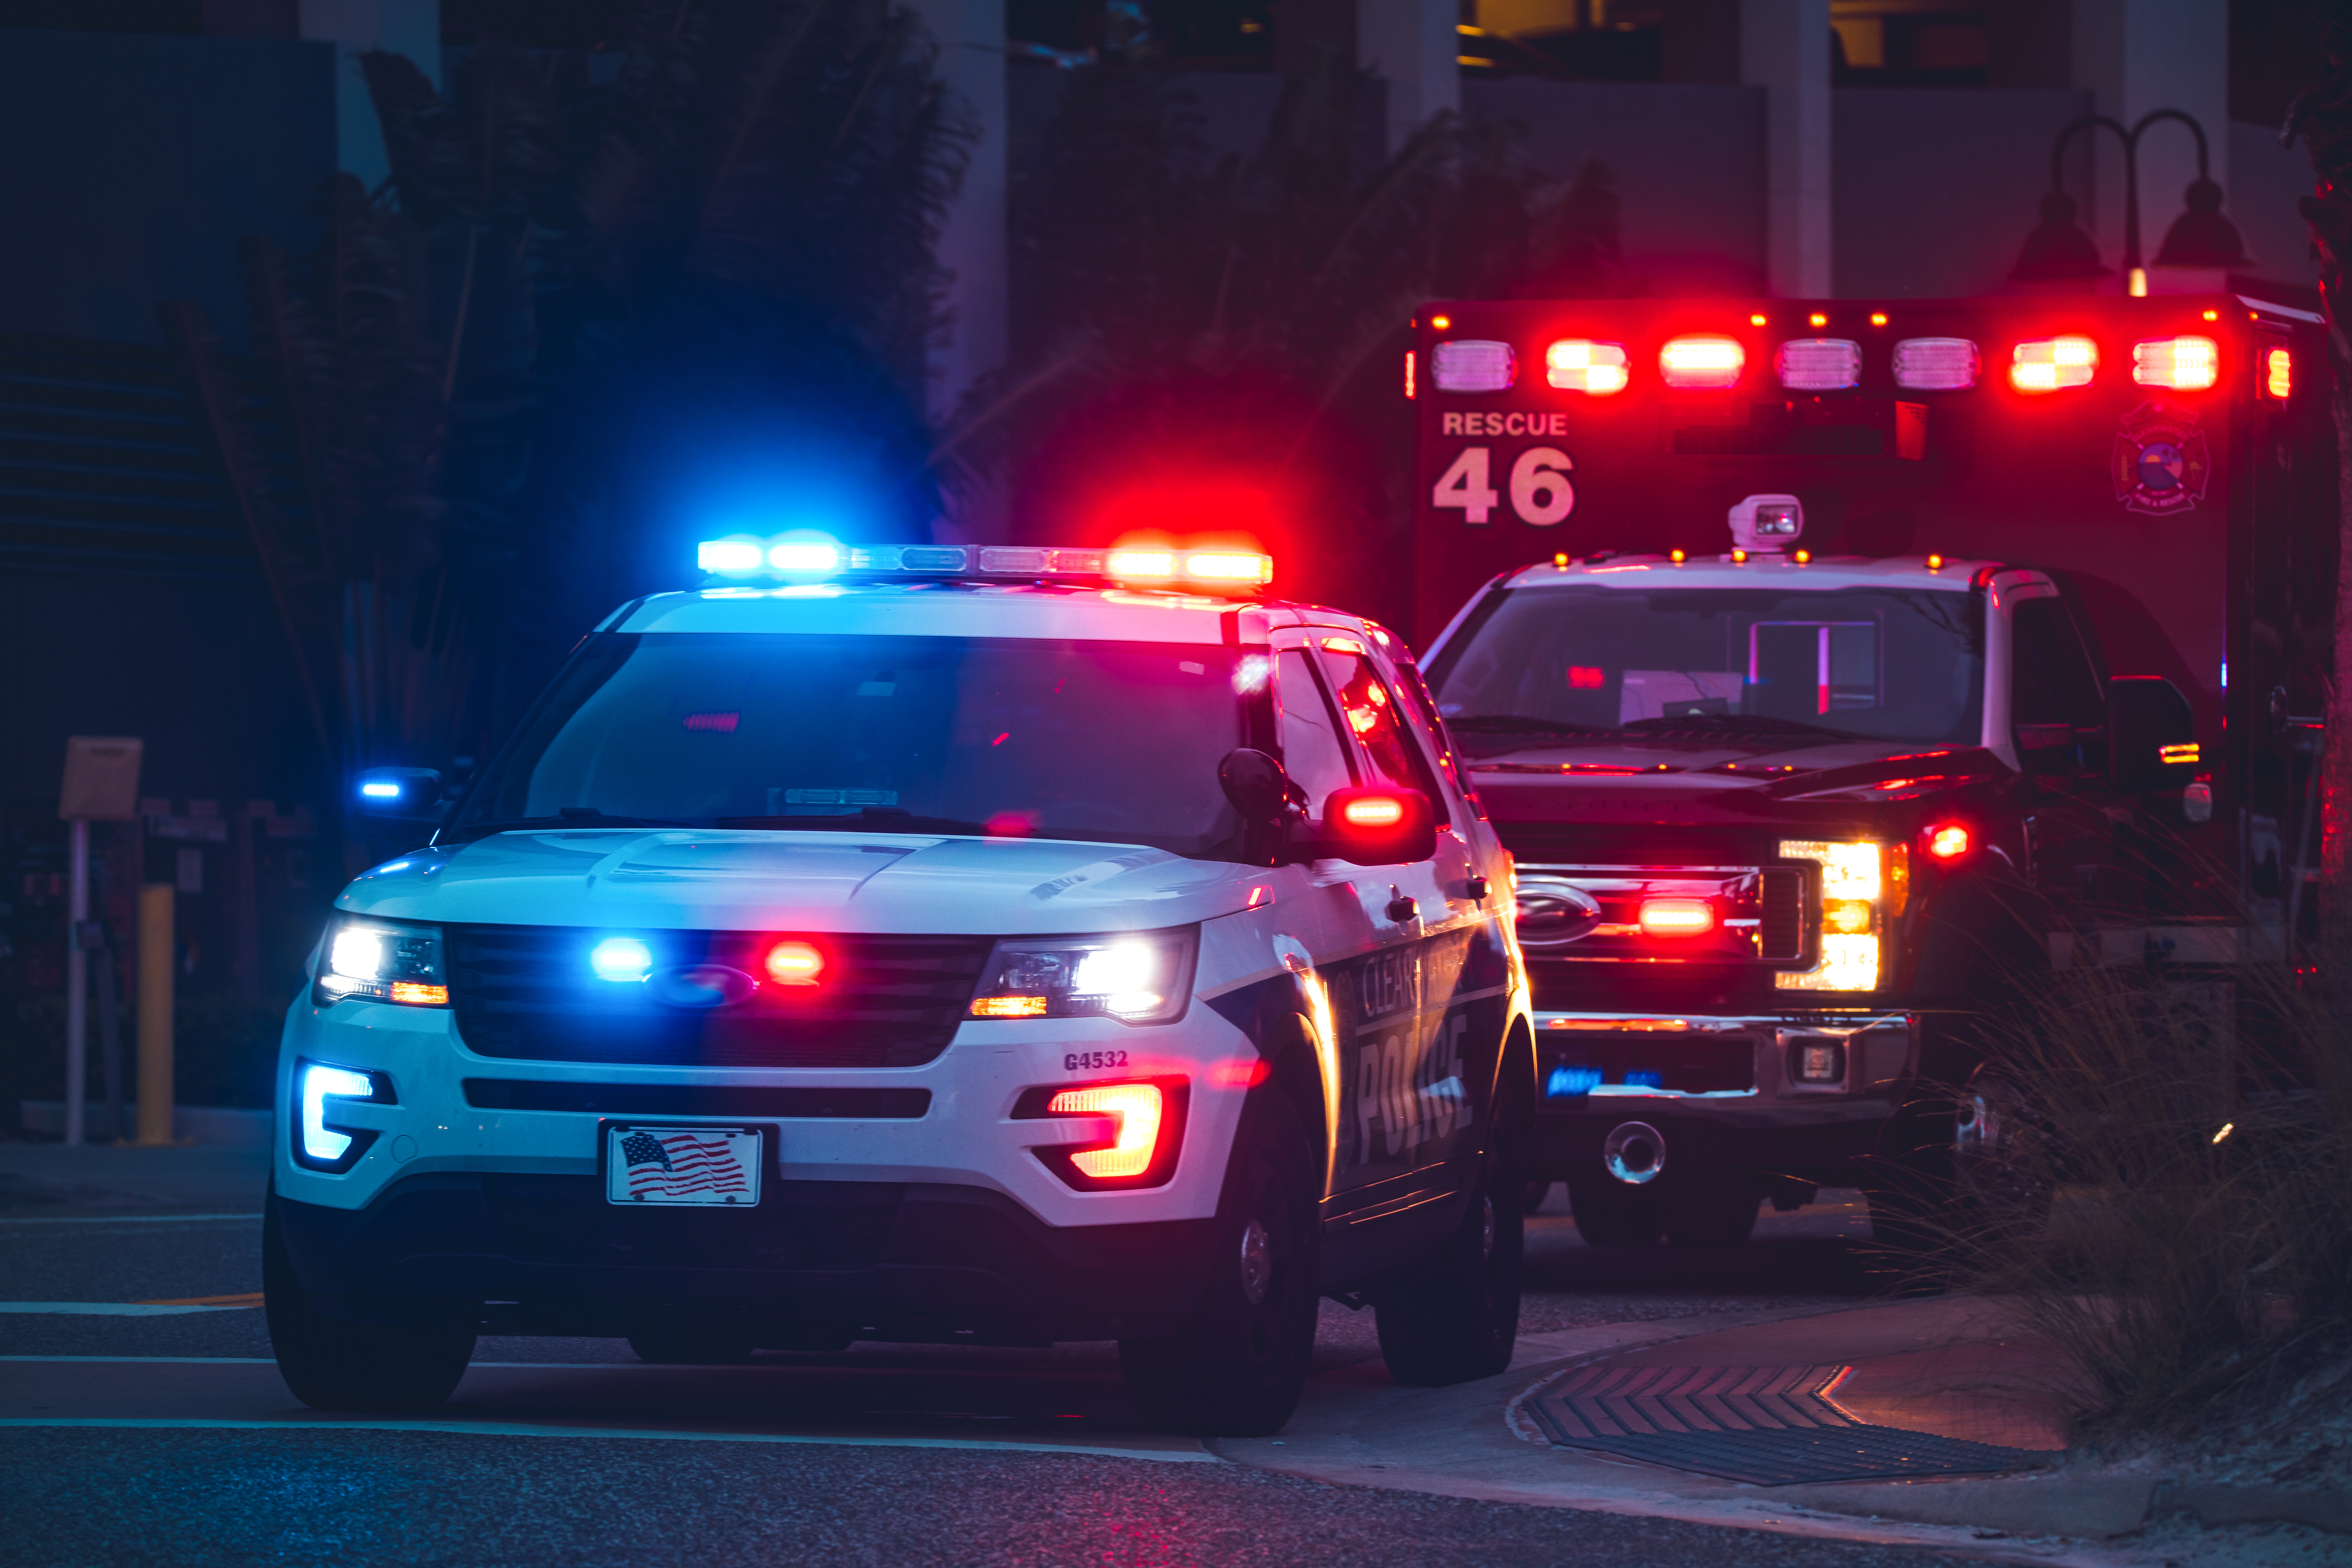 American Police Car and Emergency truck with Blue and red lights | Source: Shutterstock